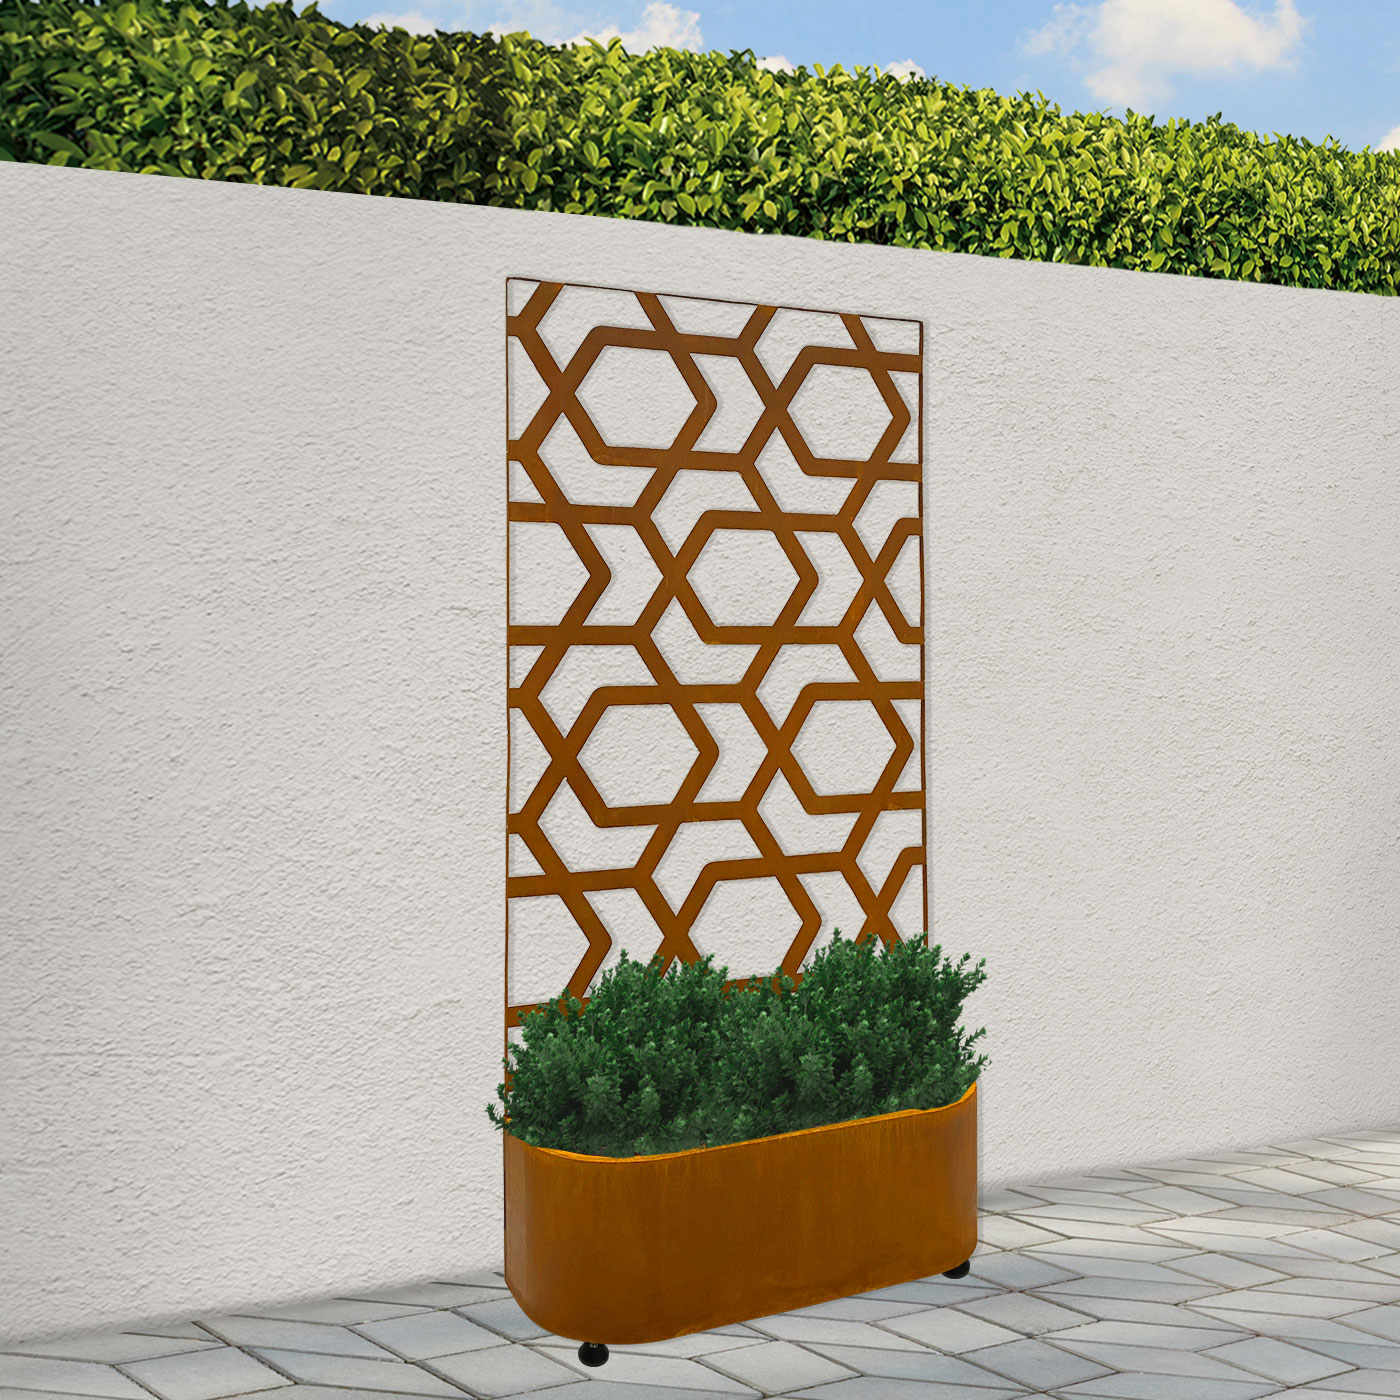 'Hive' Garden Screen with Rounded Planter 